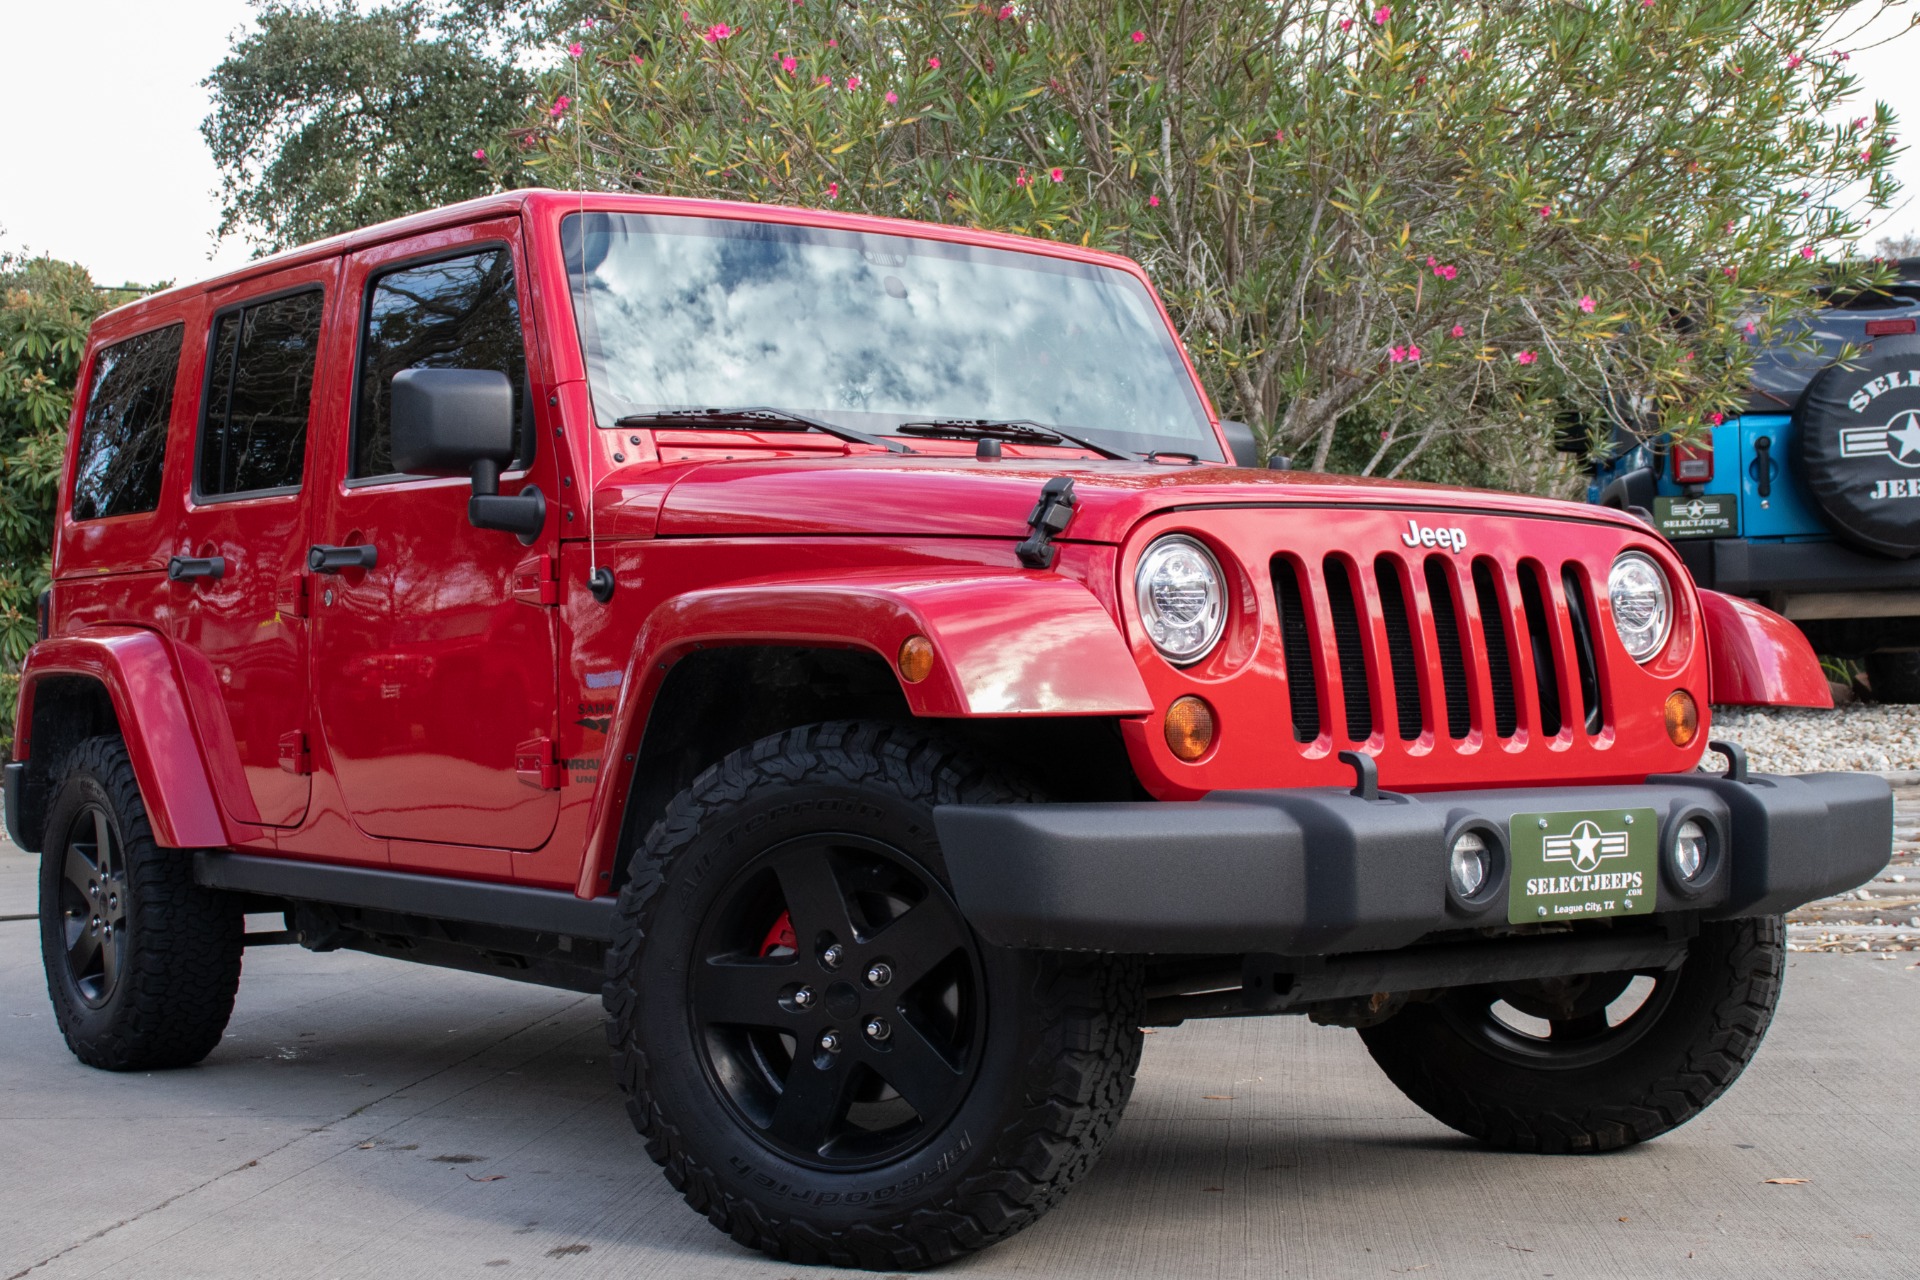 Used 2011 Jeep Wrangler Unlimited Sahara For Sale ($22,995) | Select Jeeps  Inc. Stock #612806